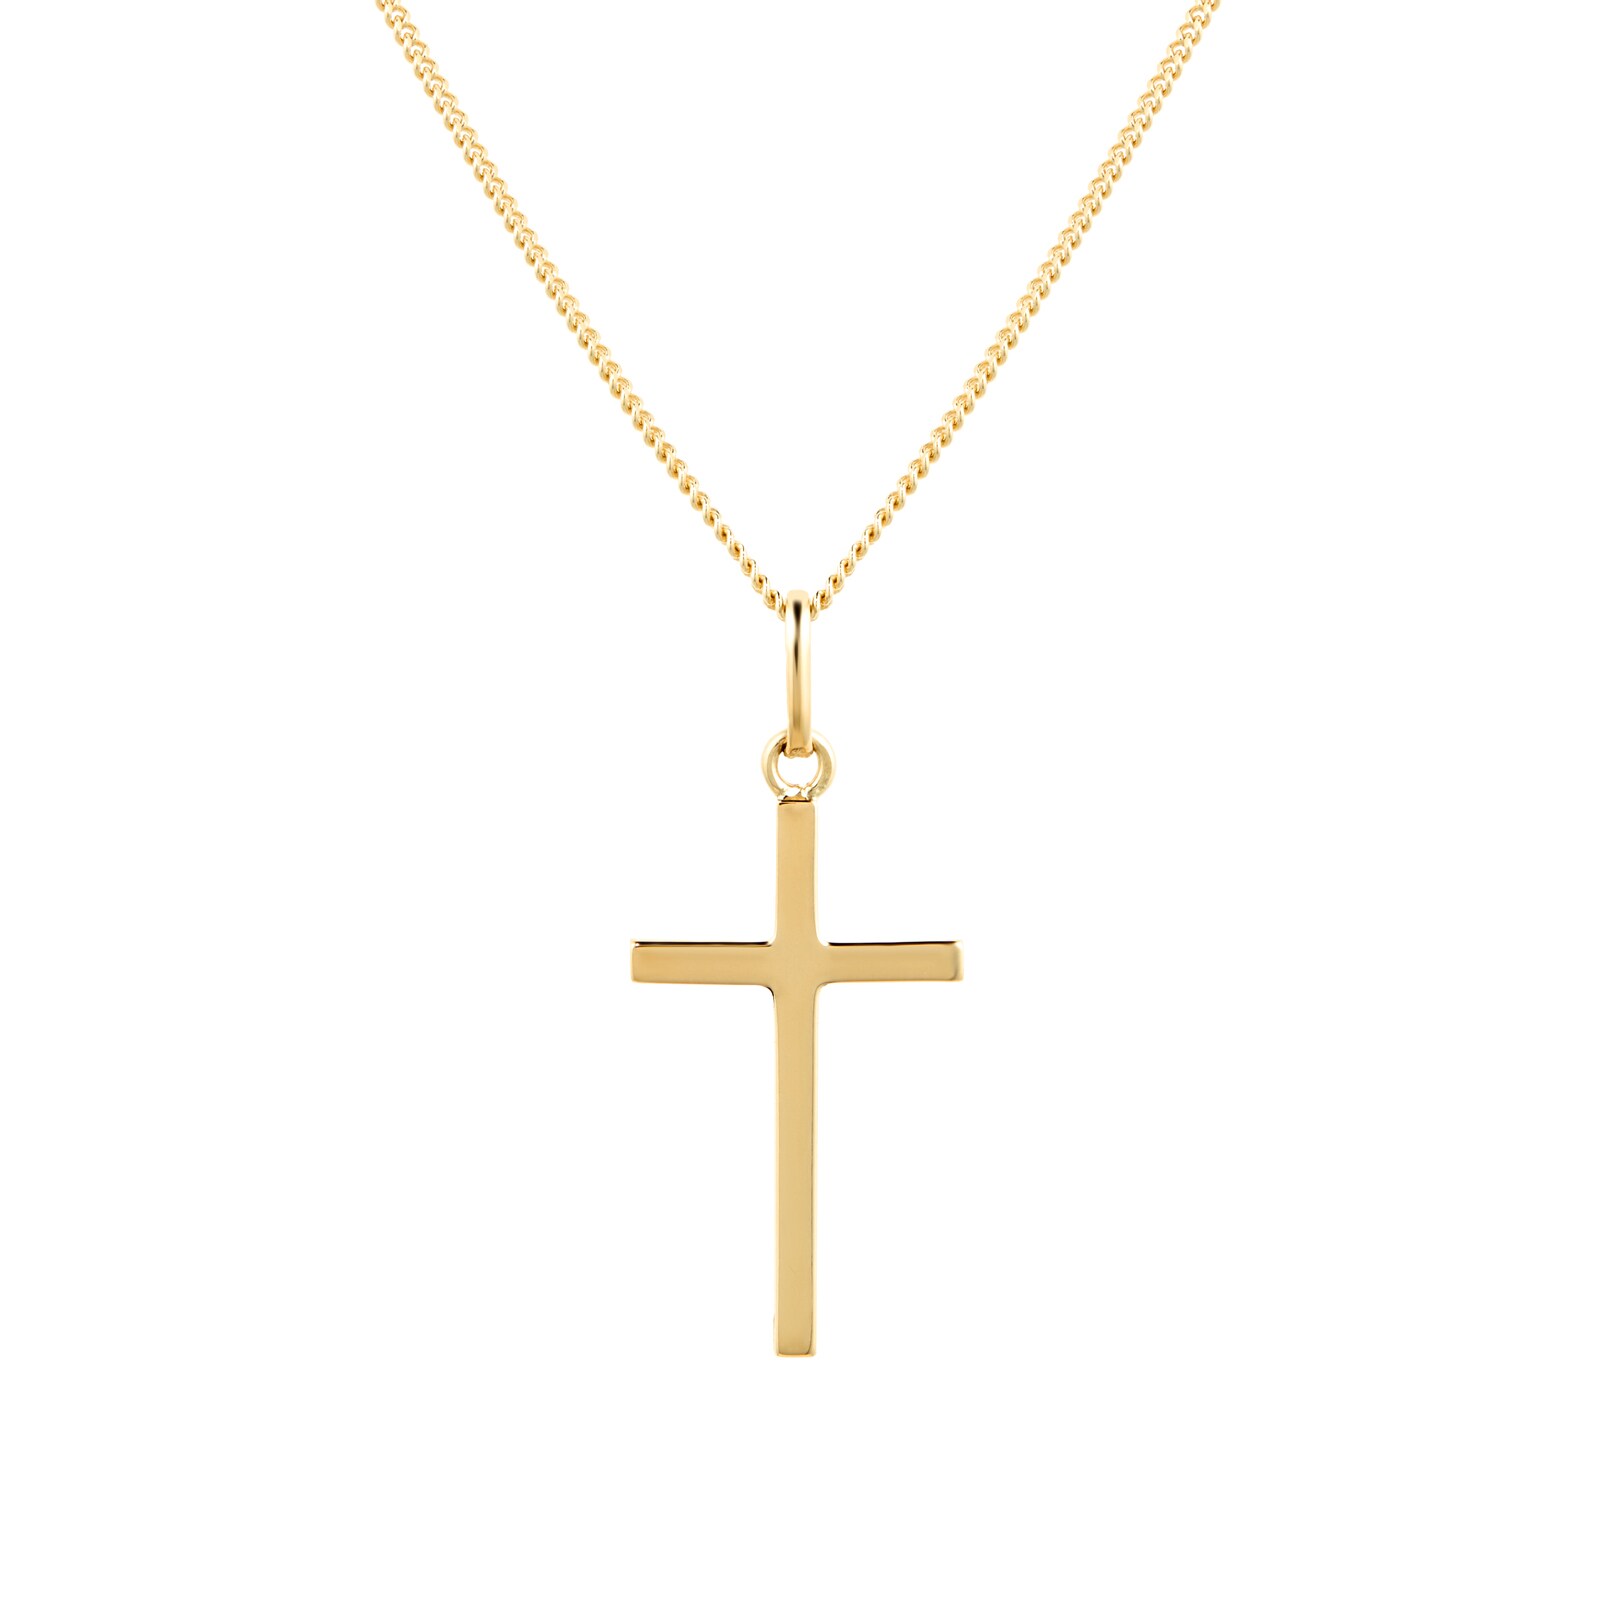 18ct Gold Over Sterling Silver Simple Plain Cross Pendant Necklace. - Etsy